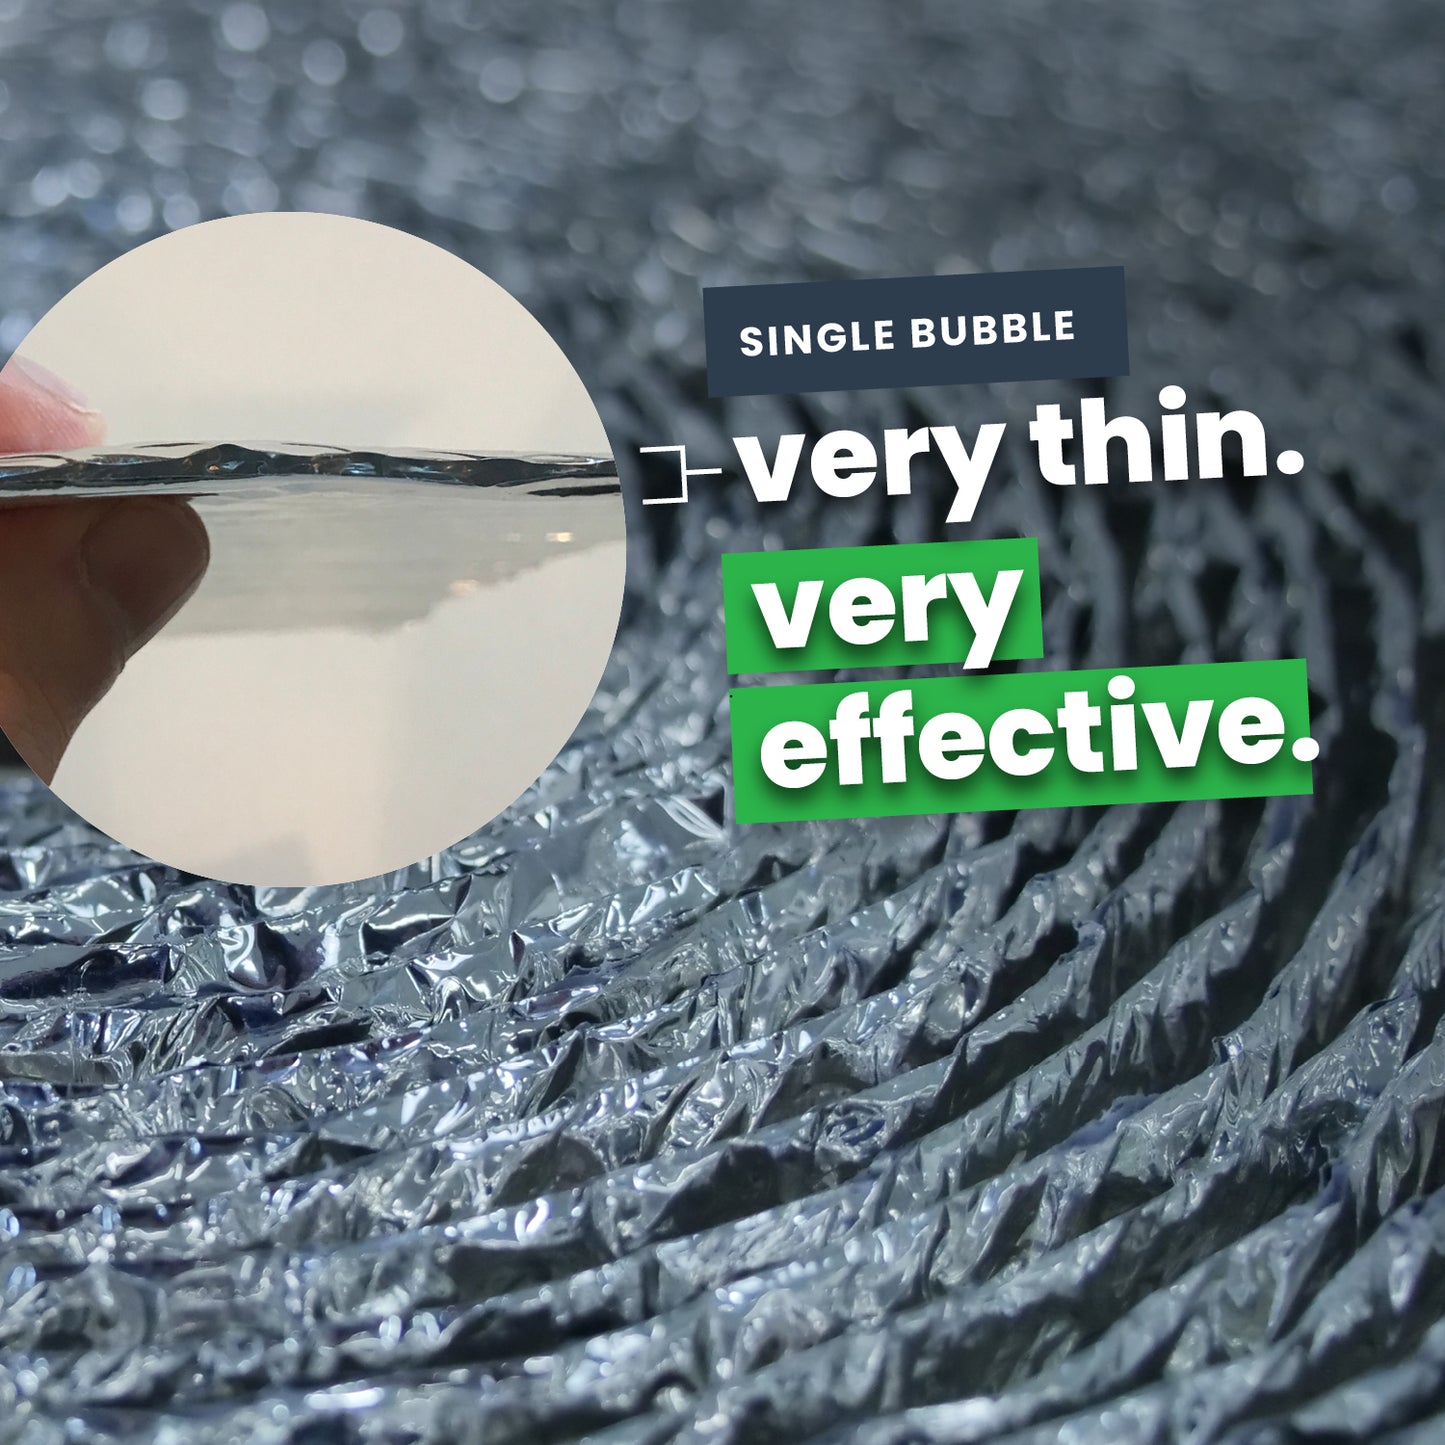 single bubble is thin and effective